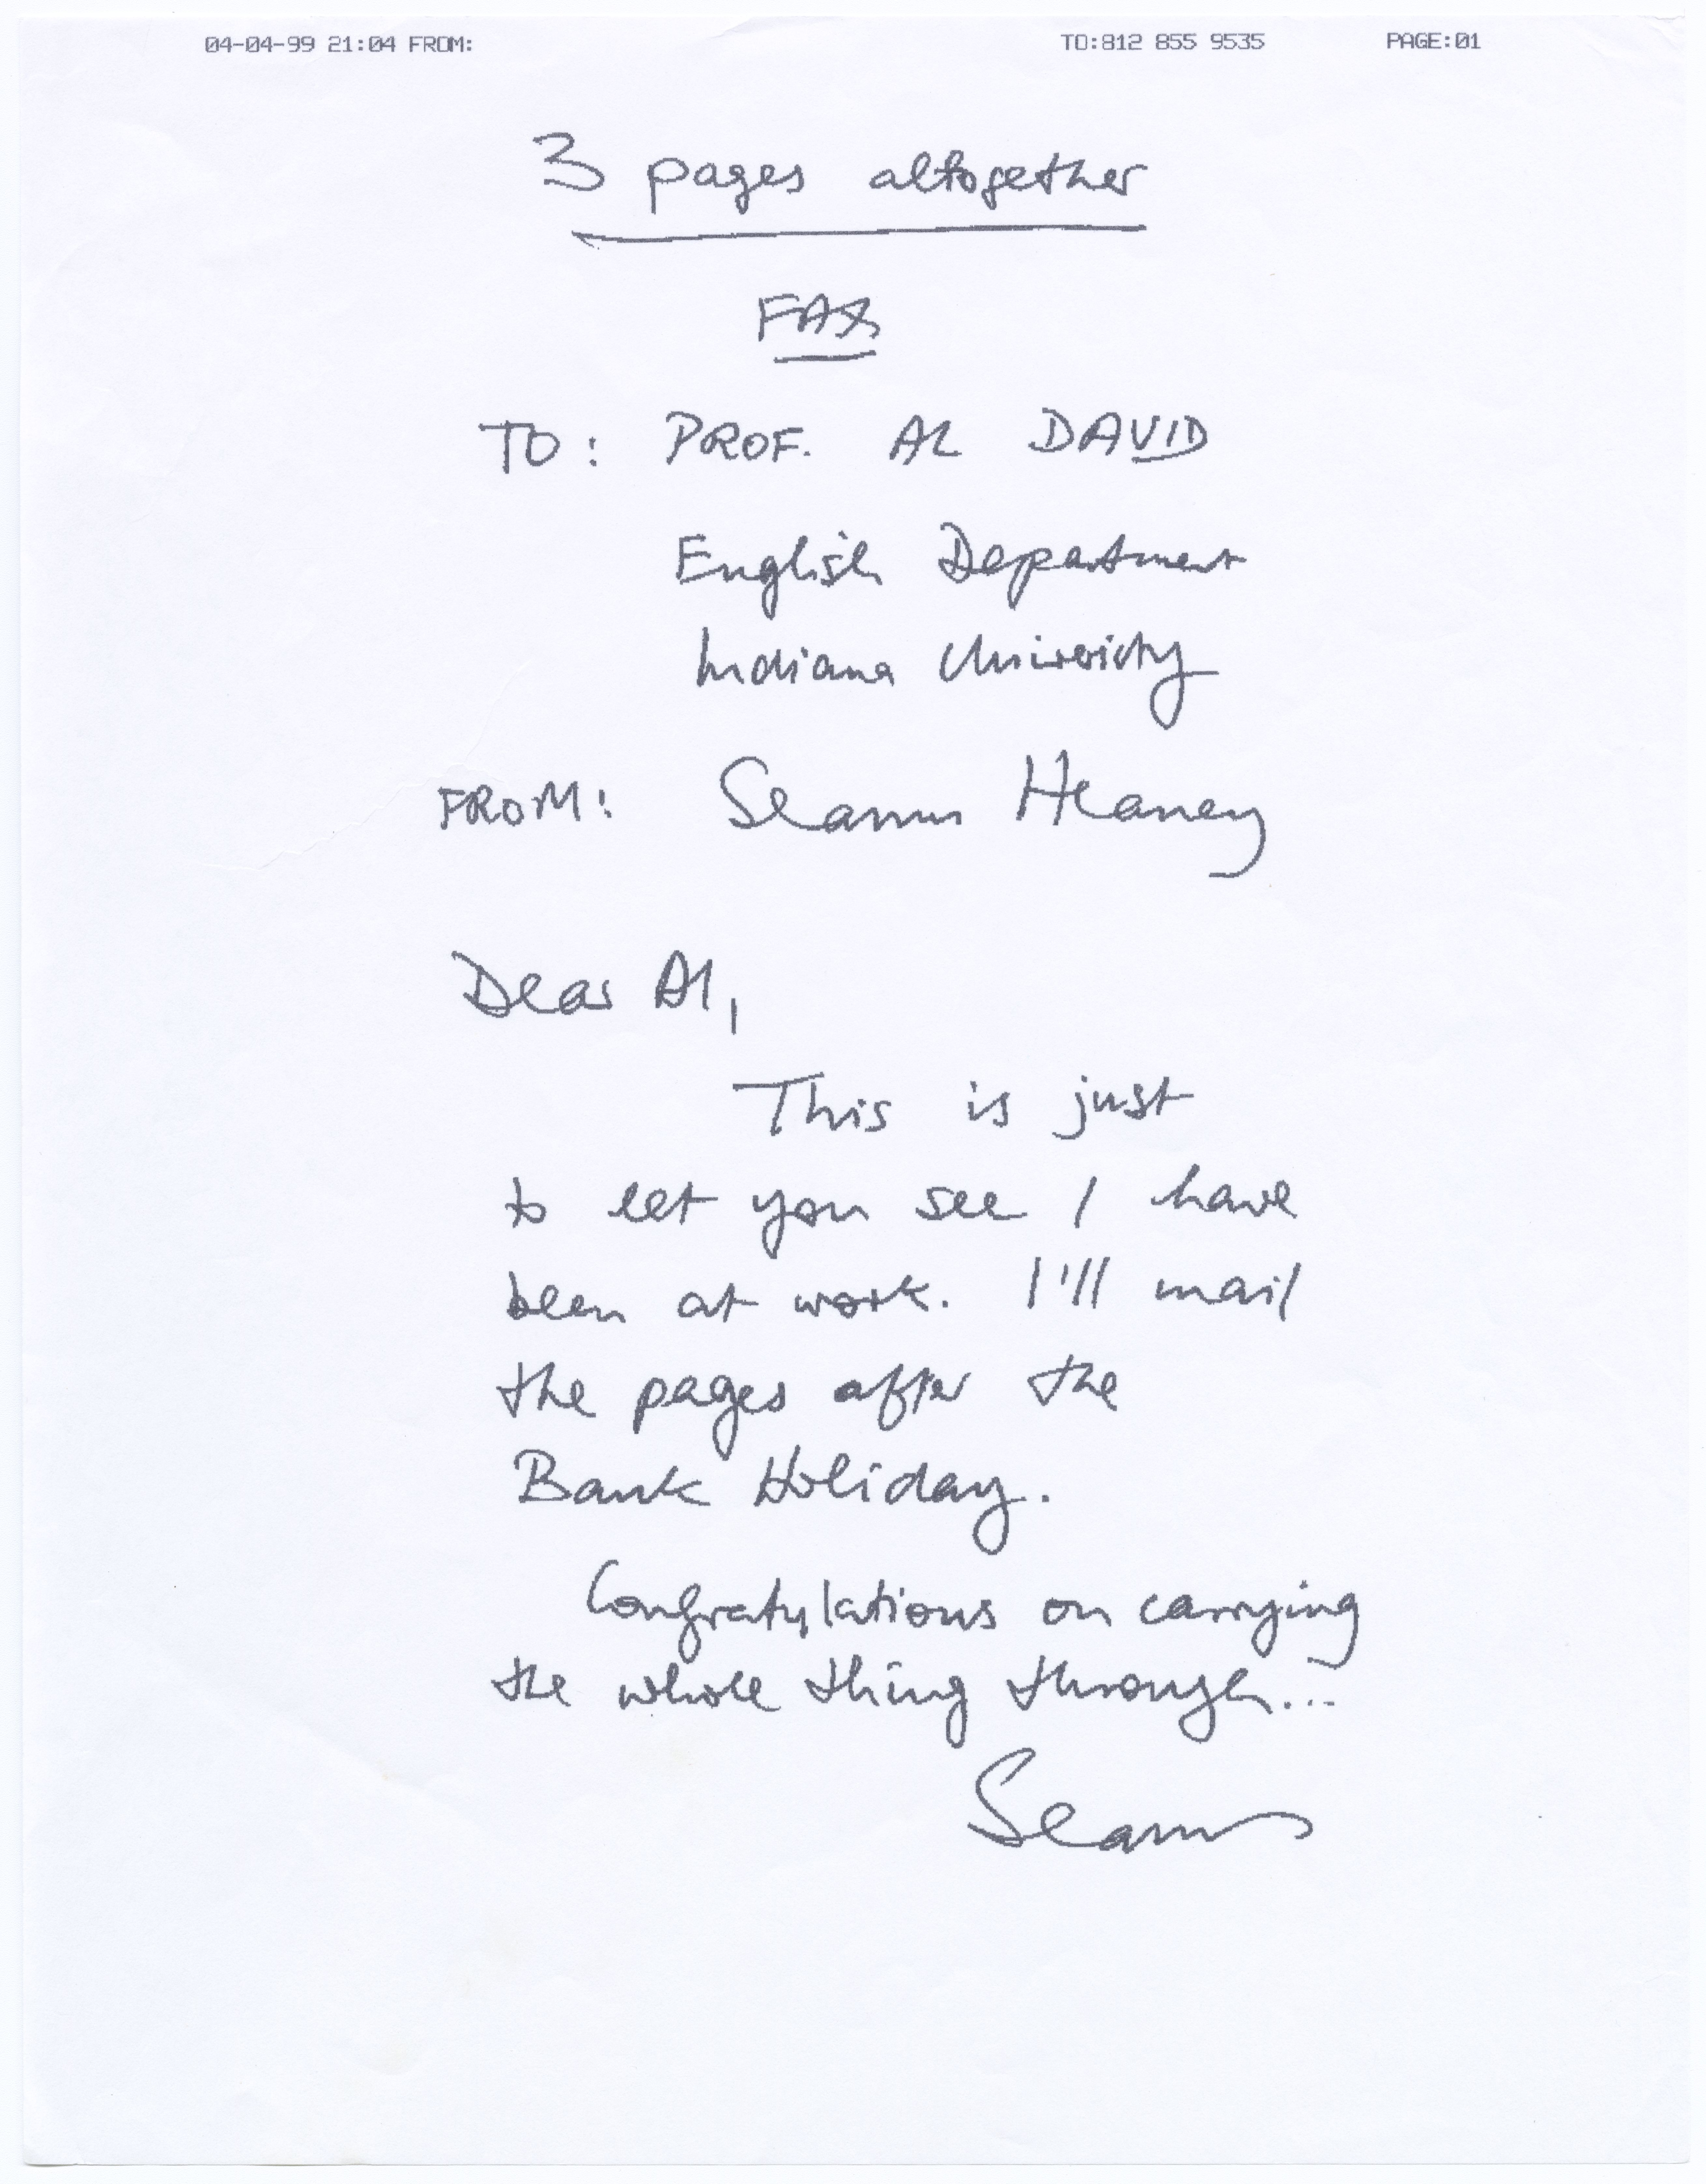 Cover letter of a fax from Seamus Heaney to Alfred David.